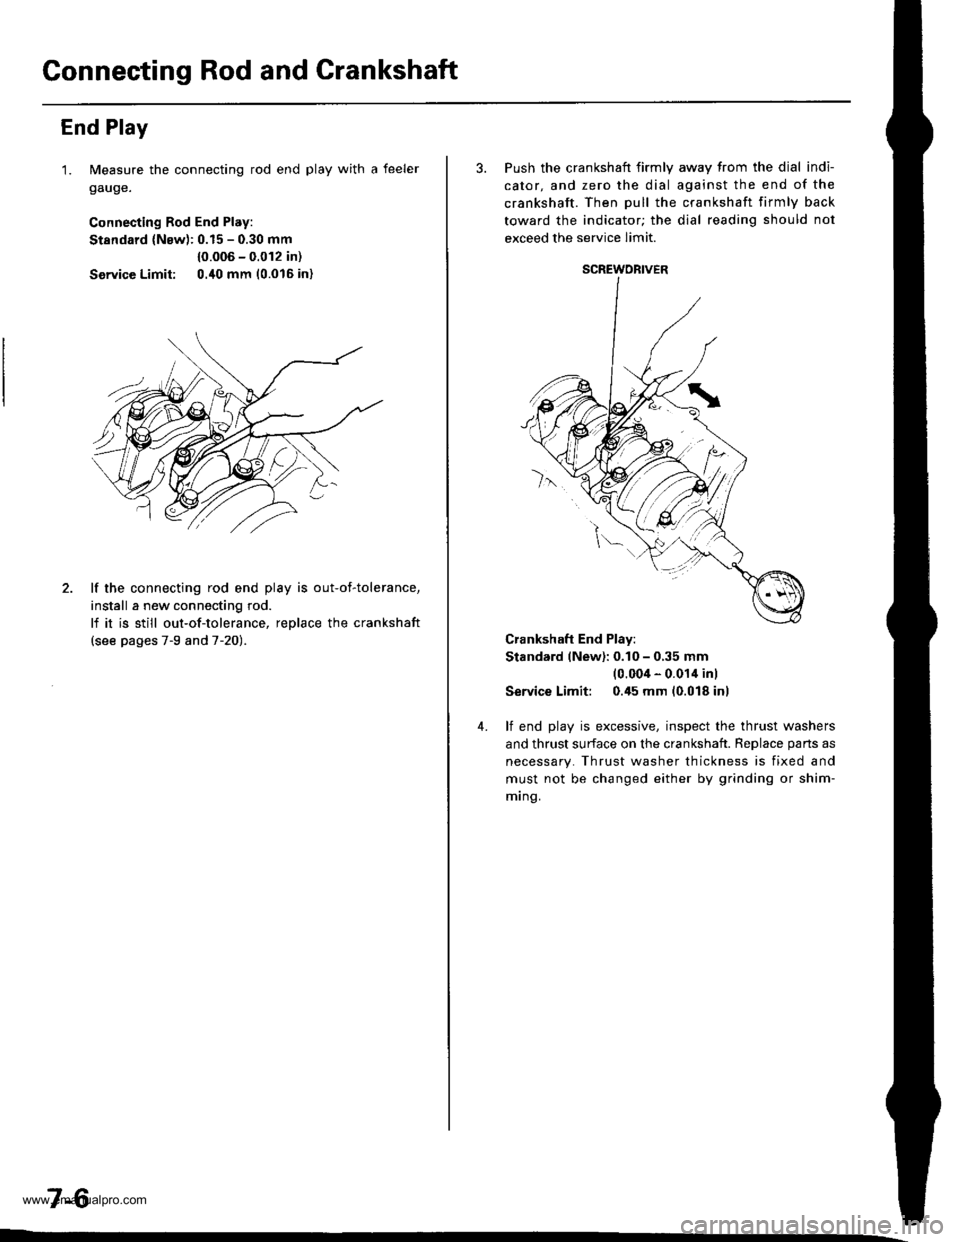 HONDA CR-V 1998 RD1-RD3 / 1.G Workshop Manual 
Connecting Rod and Crankshaft
End Play
1. Measure the connecting rod end play with a feeler
gauge.
Connecting Rod End Play:
Stsndard (Nsw): 0.15 - 0.30 mm
{0.006 - 0.012 in)
Service Limit: 0./t0 mm 1